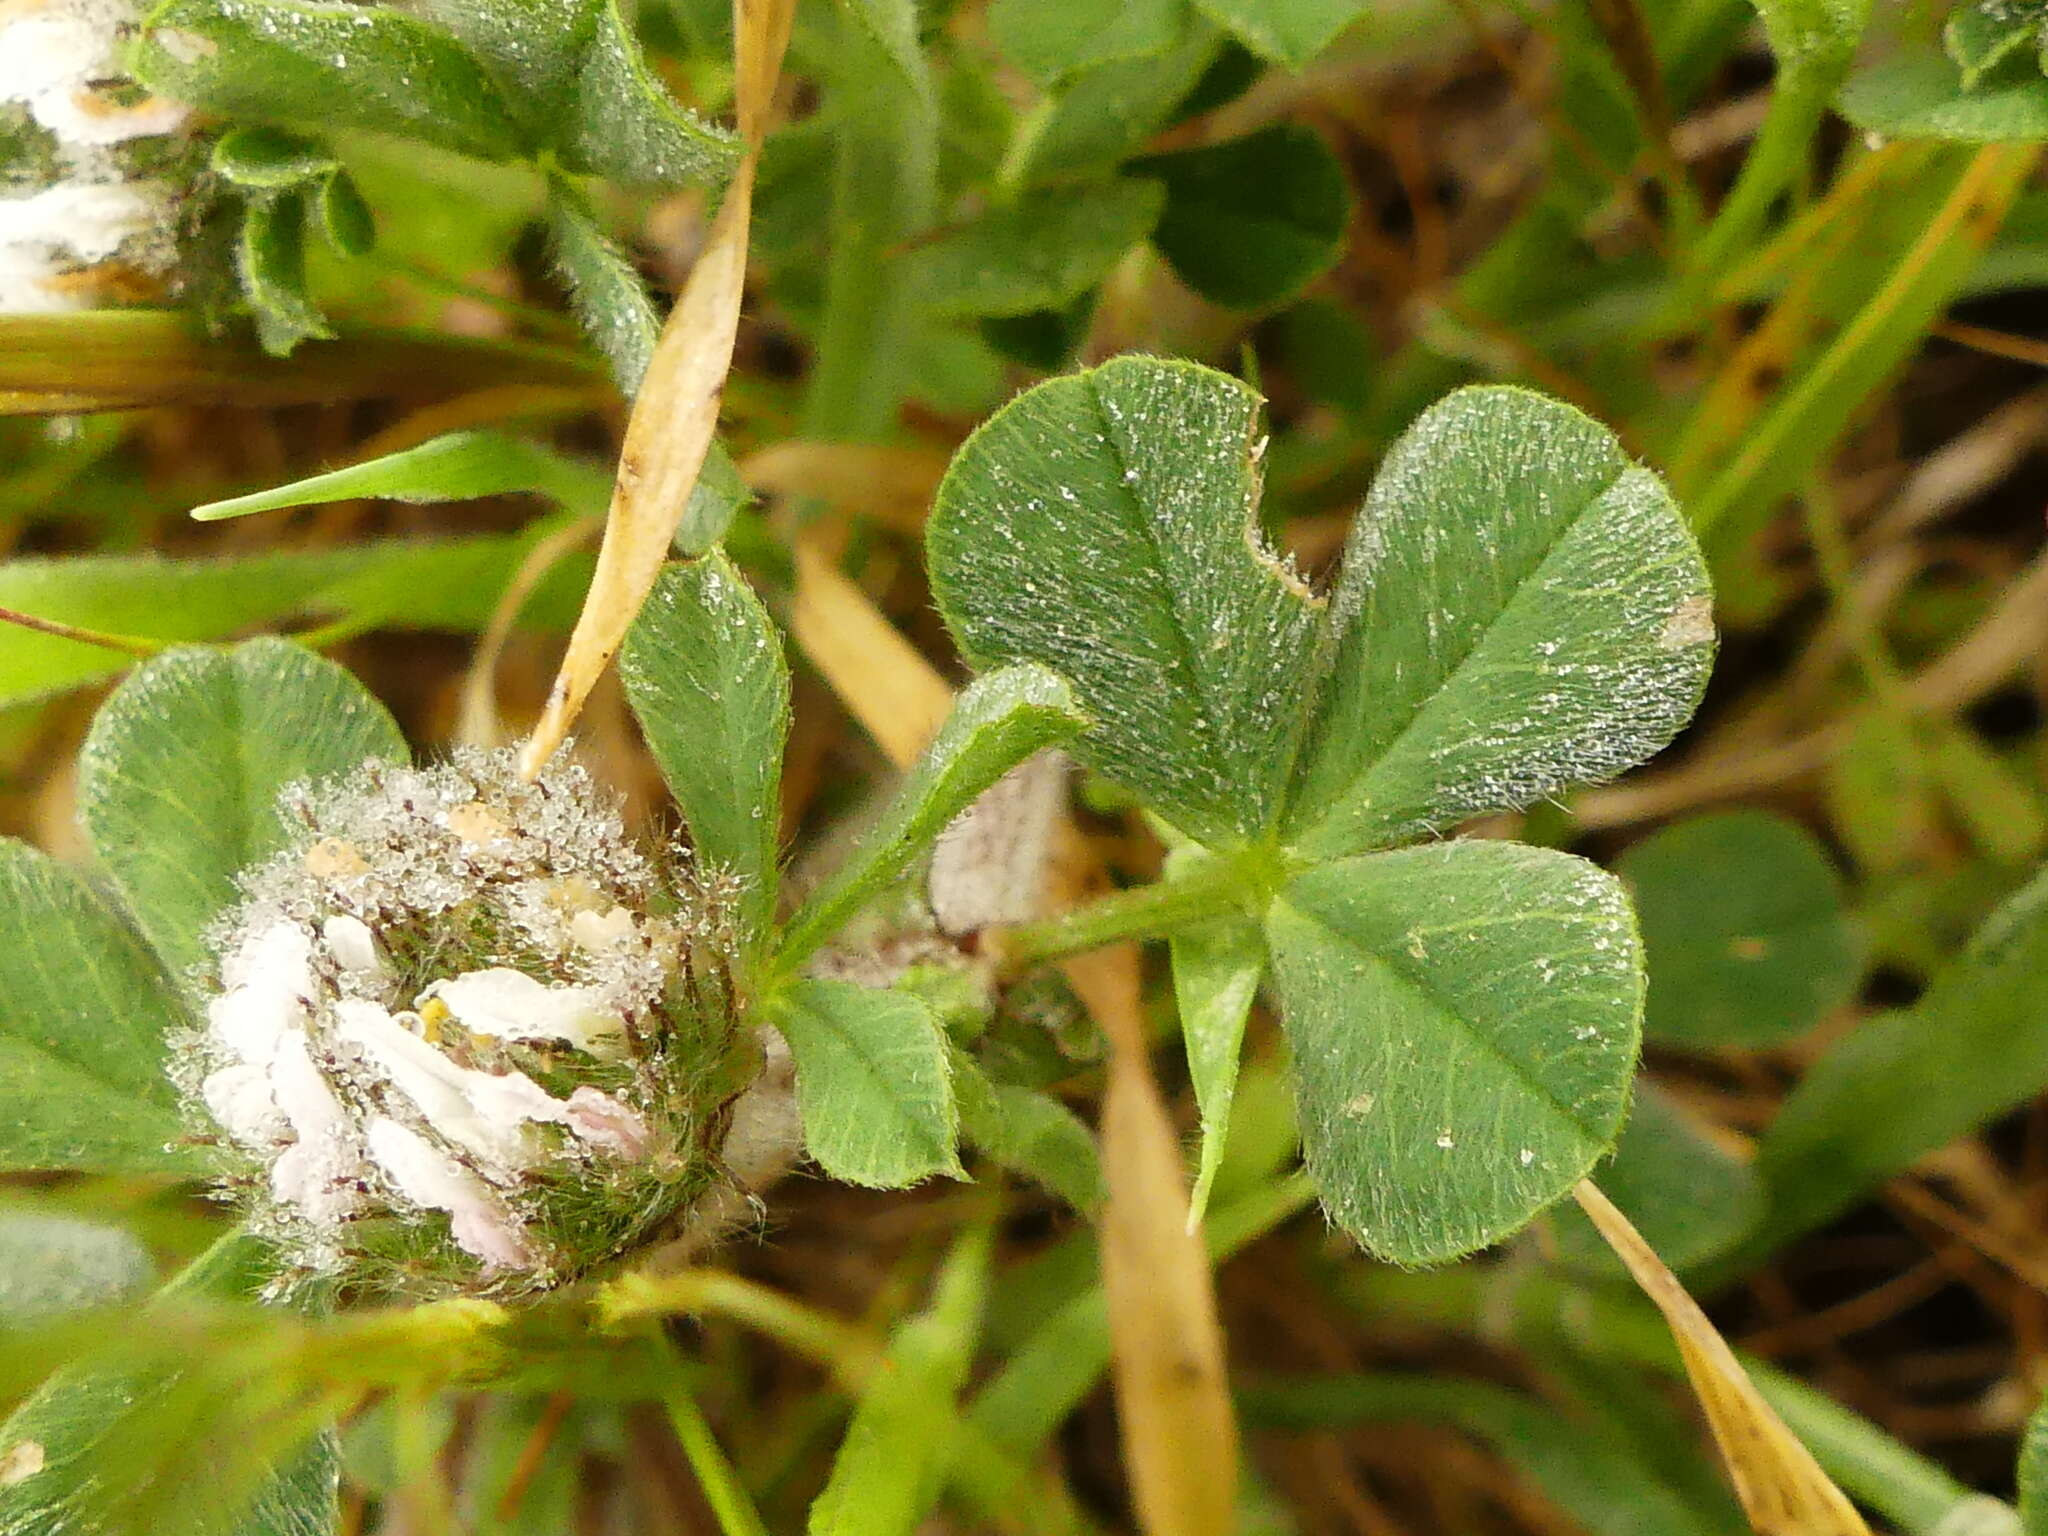 Image of southern clover